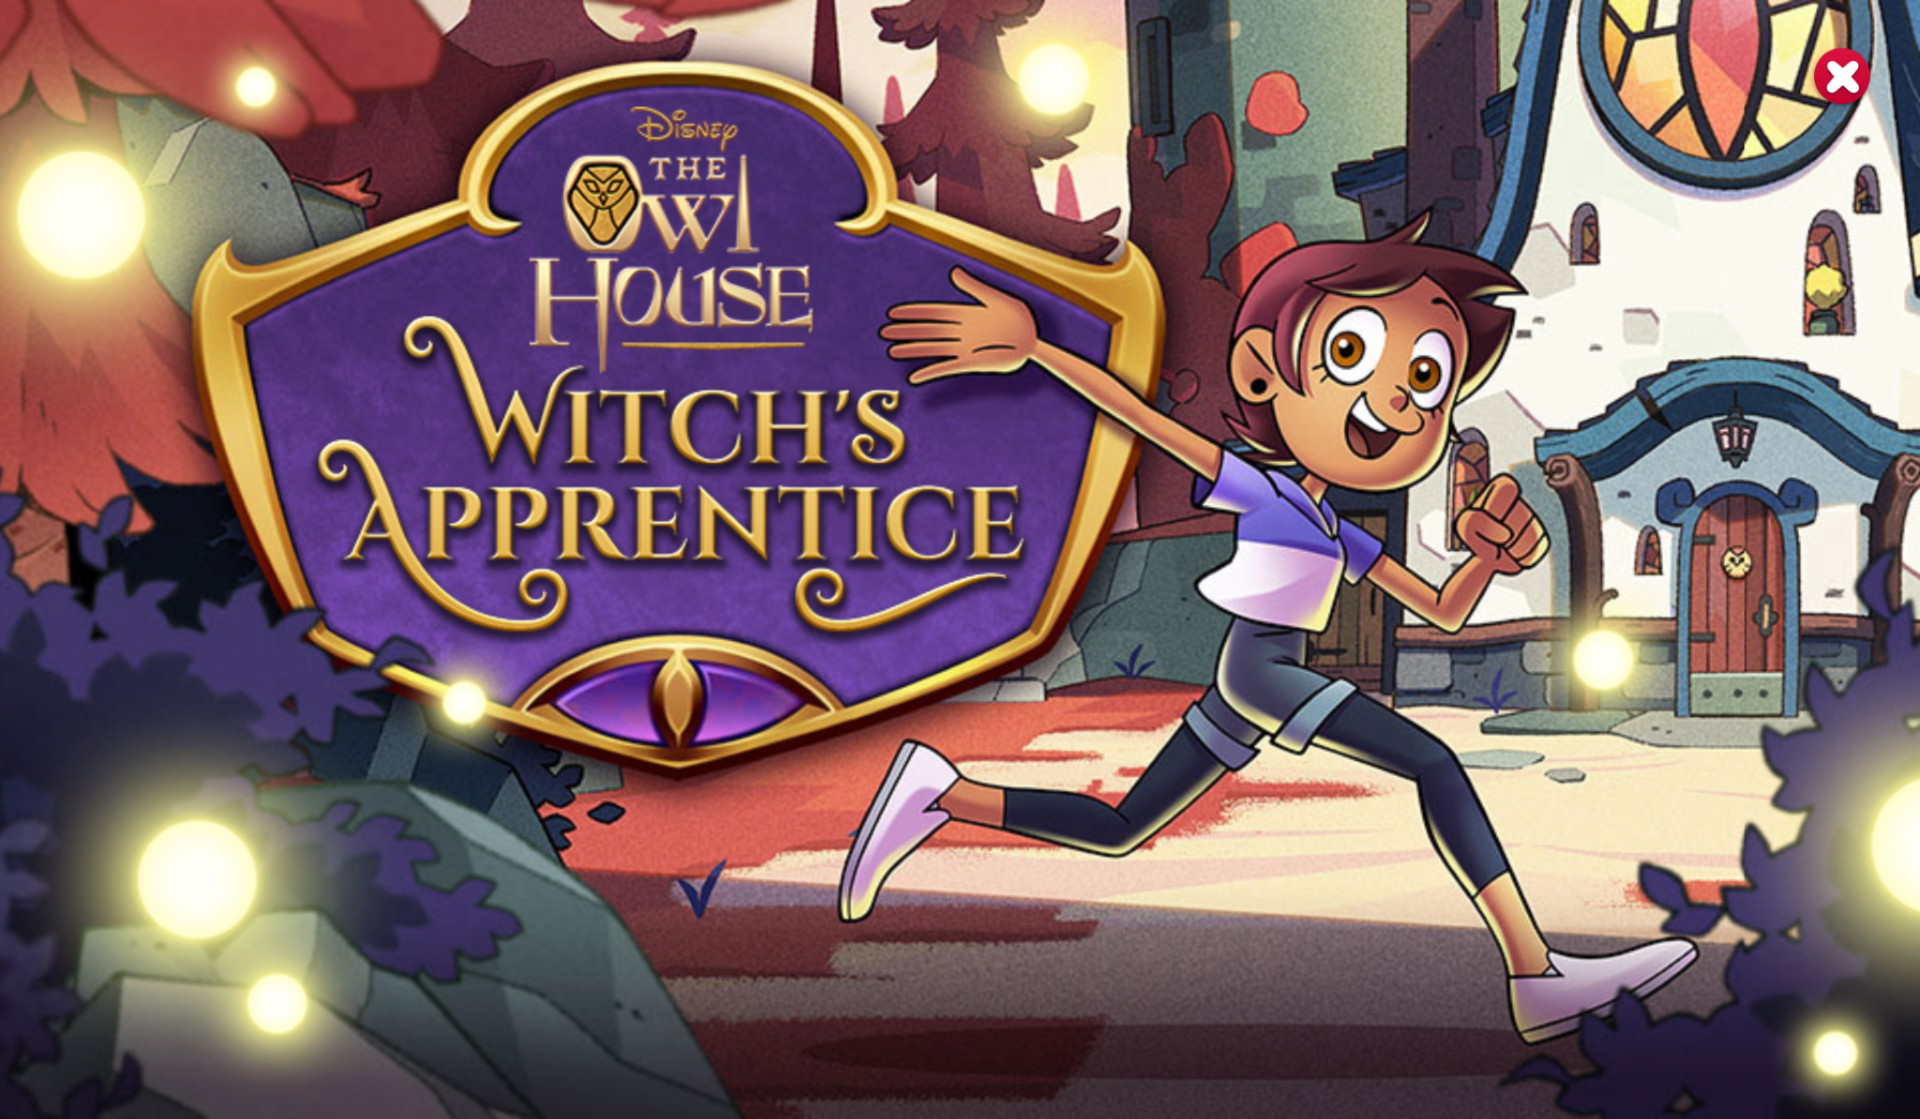 Video Game The Owl House: Witch's Apprentice HD Wallpaper | Background Image